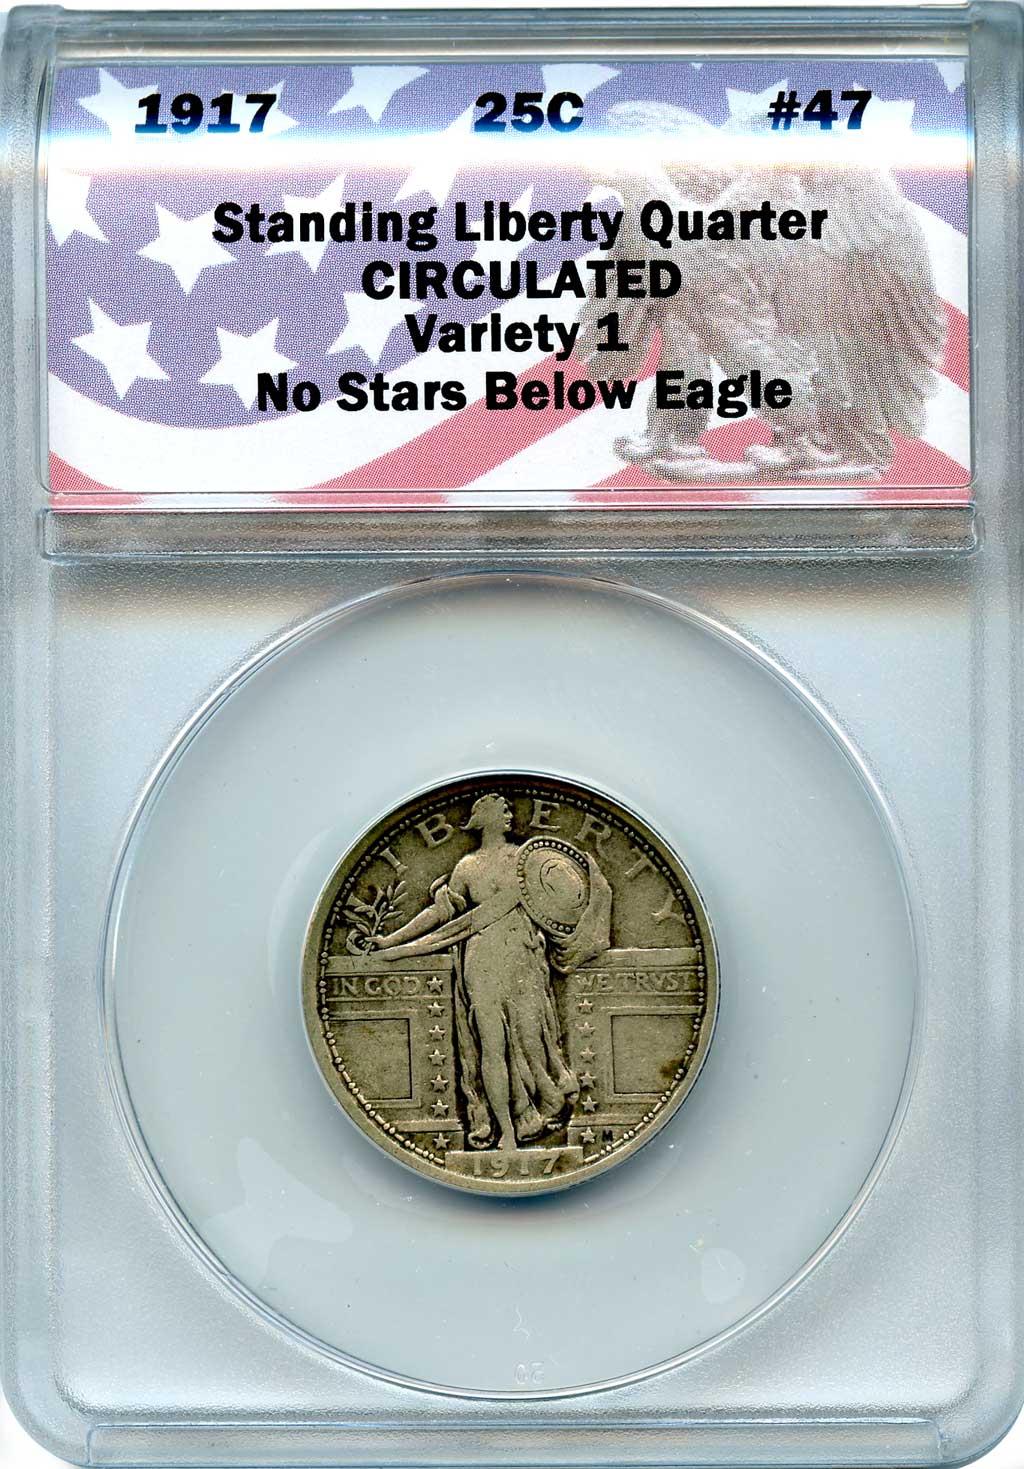 CollecTons Keepers #47: 1917 Type 1 Standing Liberty Quarter Certified in Exclusive ANACS Holder